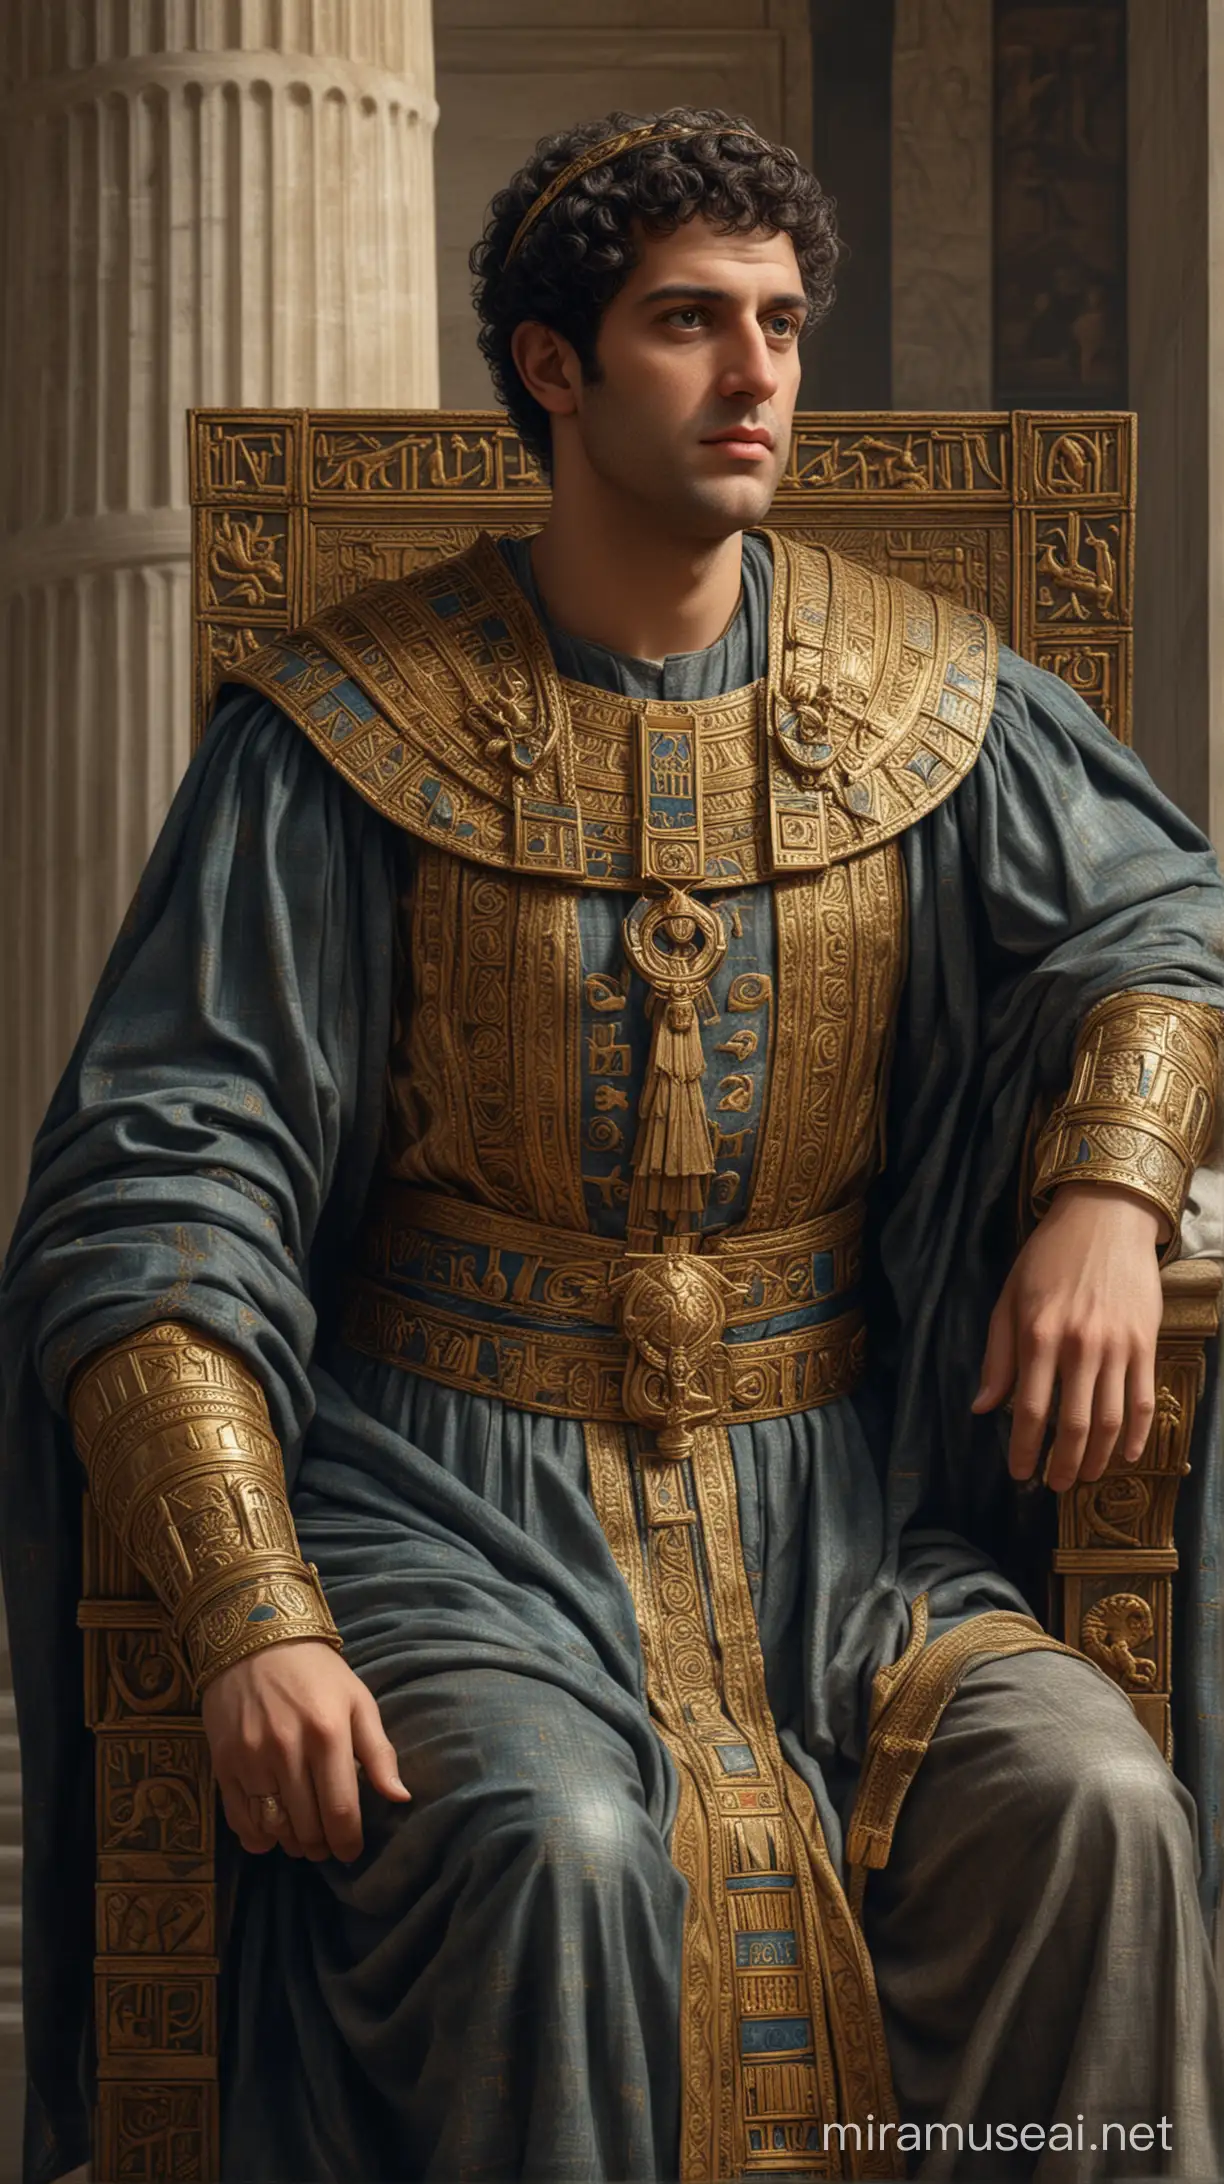 Generate an AI image depicting Ptolemy I Soter, the inaugural ruler of Alexandria, exuding regal authority and wisdom. Envision him adorned in royal attire, seated upon a throne or amidst grand architecture, with a demeanor that reflects his pioneering leadership and the founding of one of the most renowned cities of the ancient world. Hyper realistic